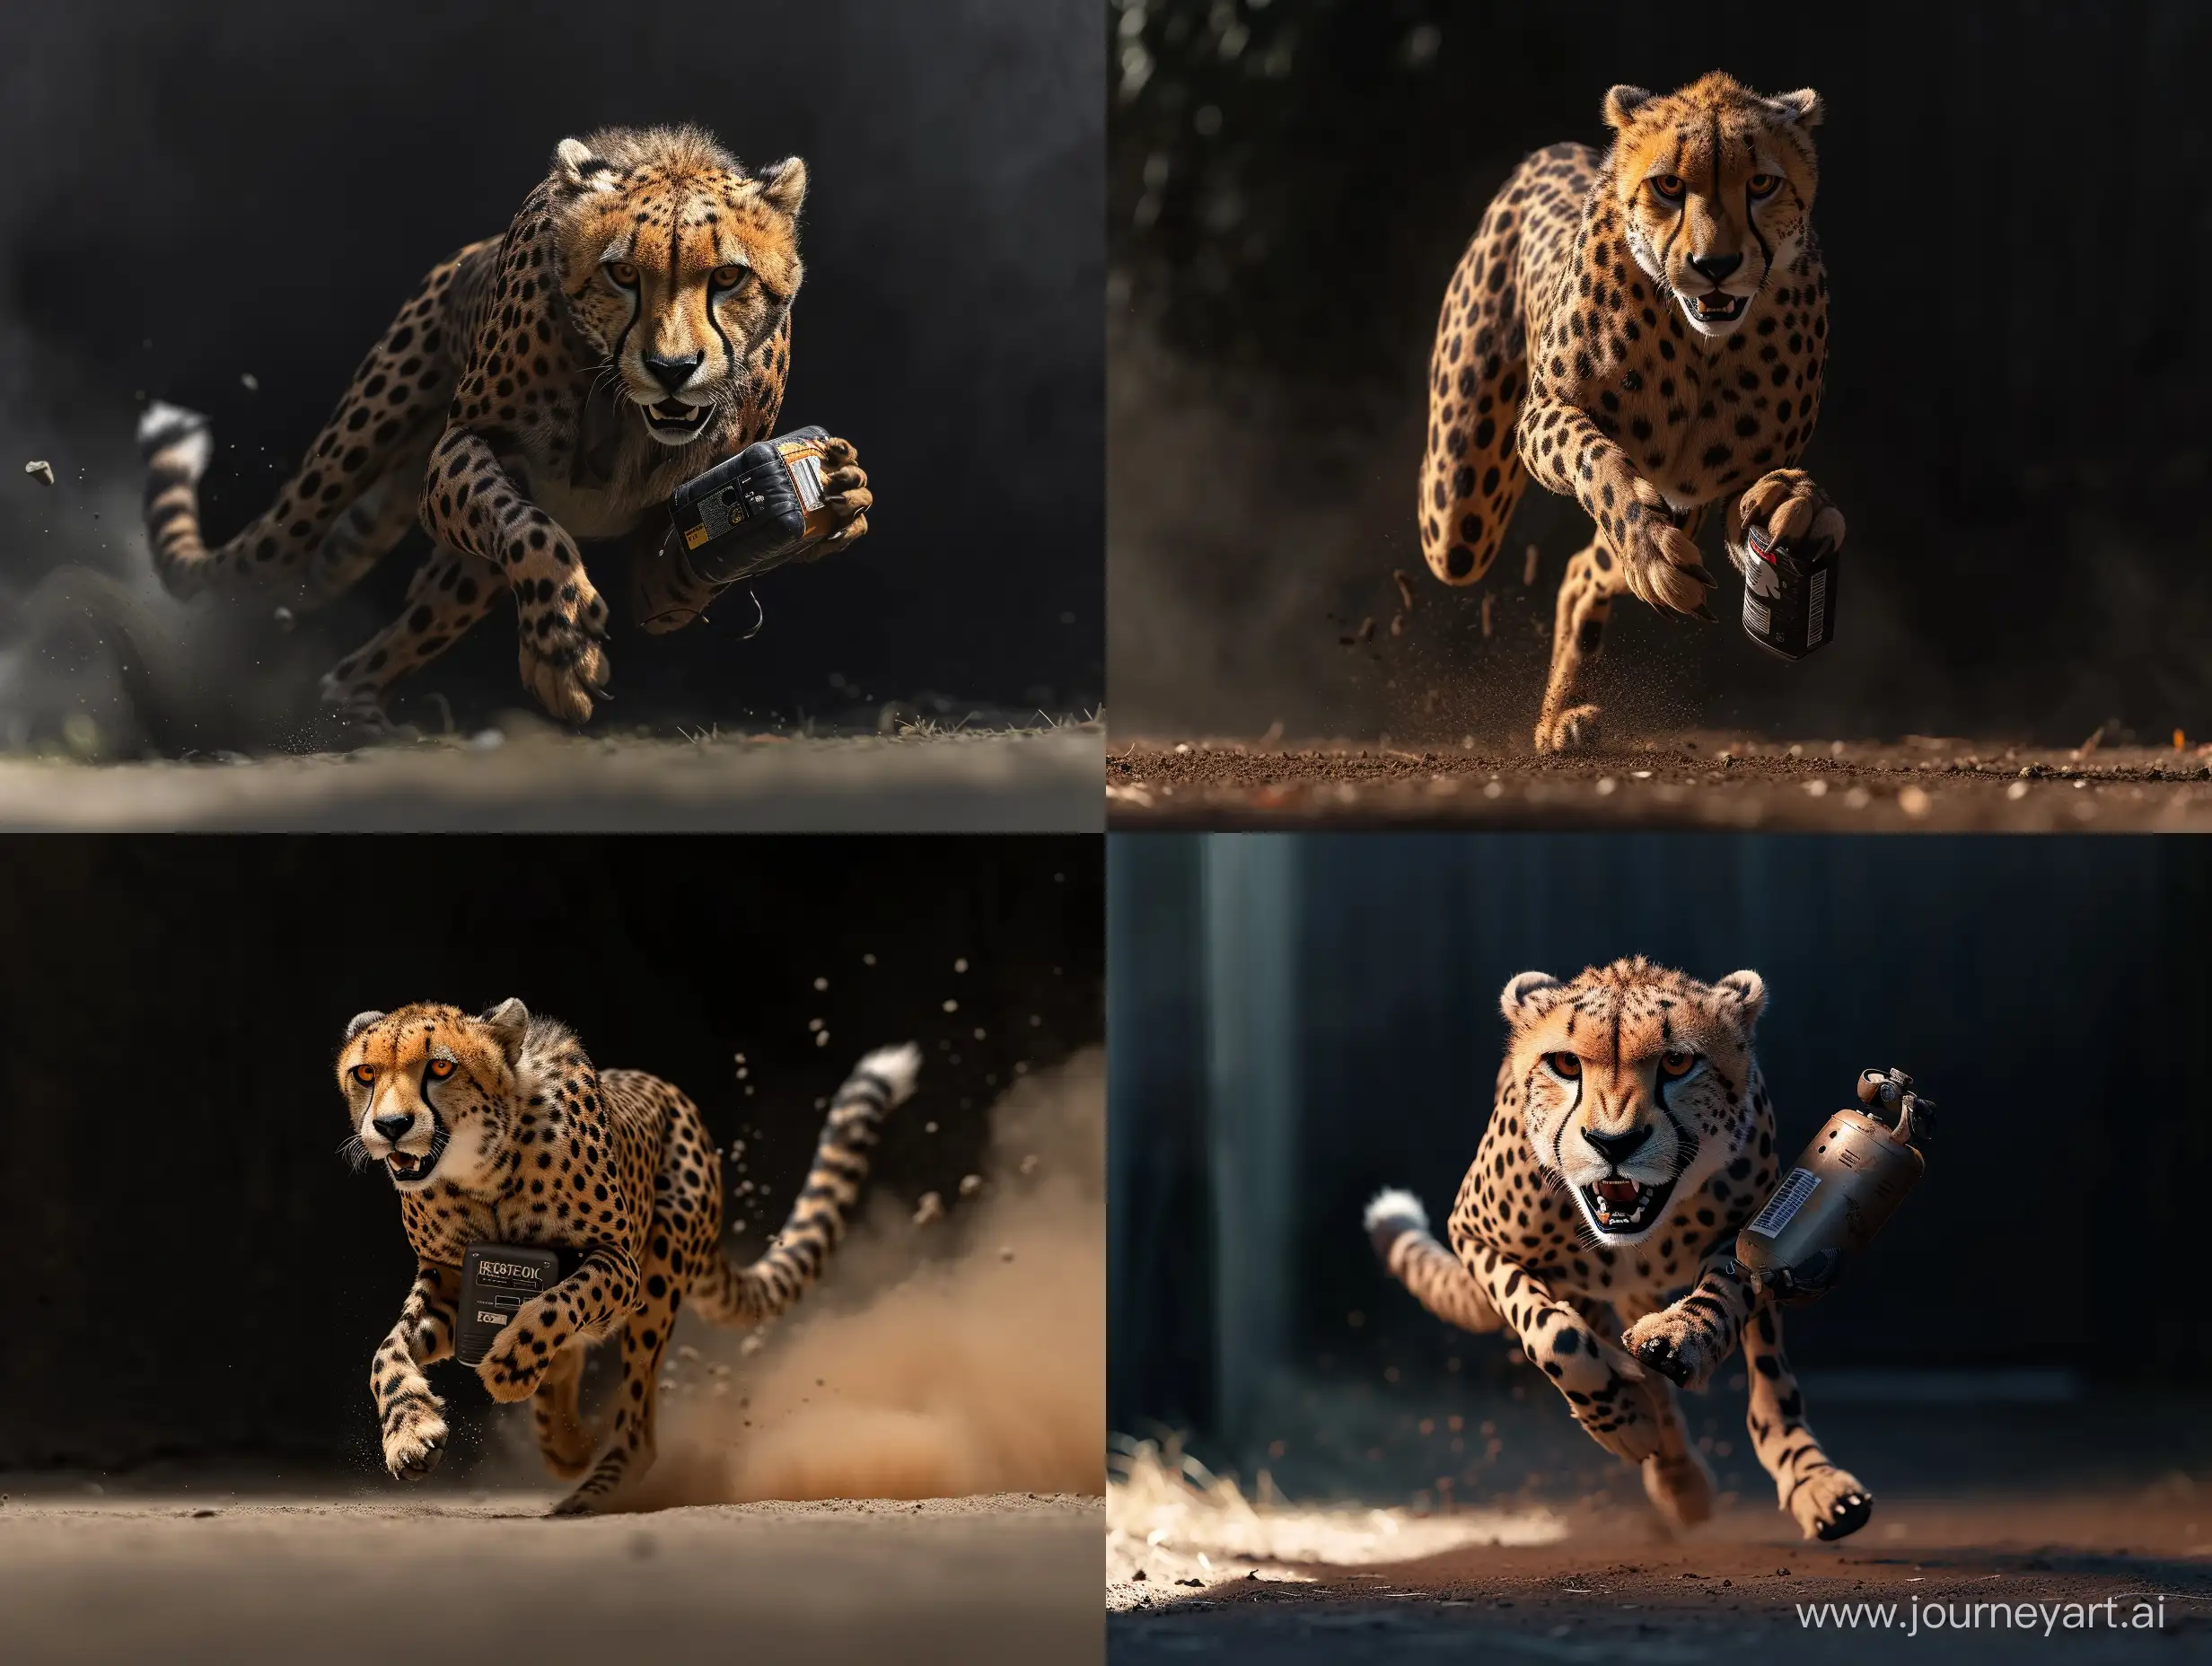 Energetic-Cheetah-Mascot-Speeding-with-Battery-in-Hand-HighQuality-Promotional-Image